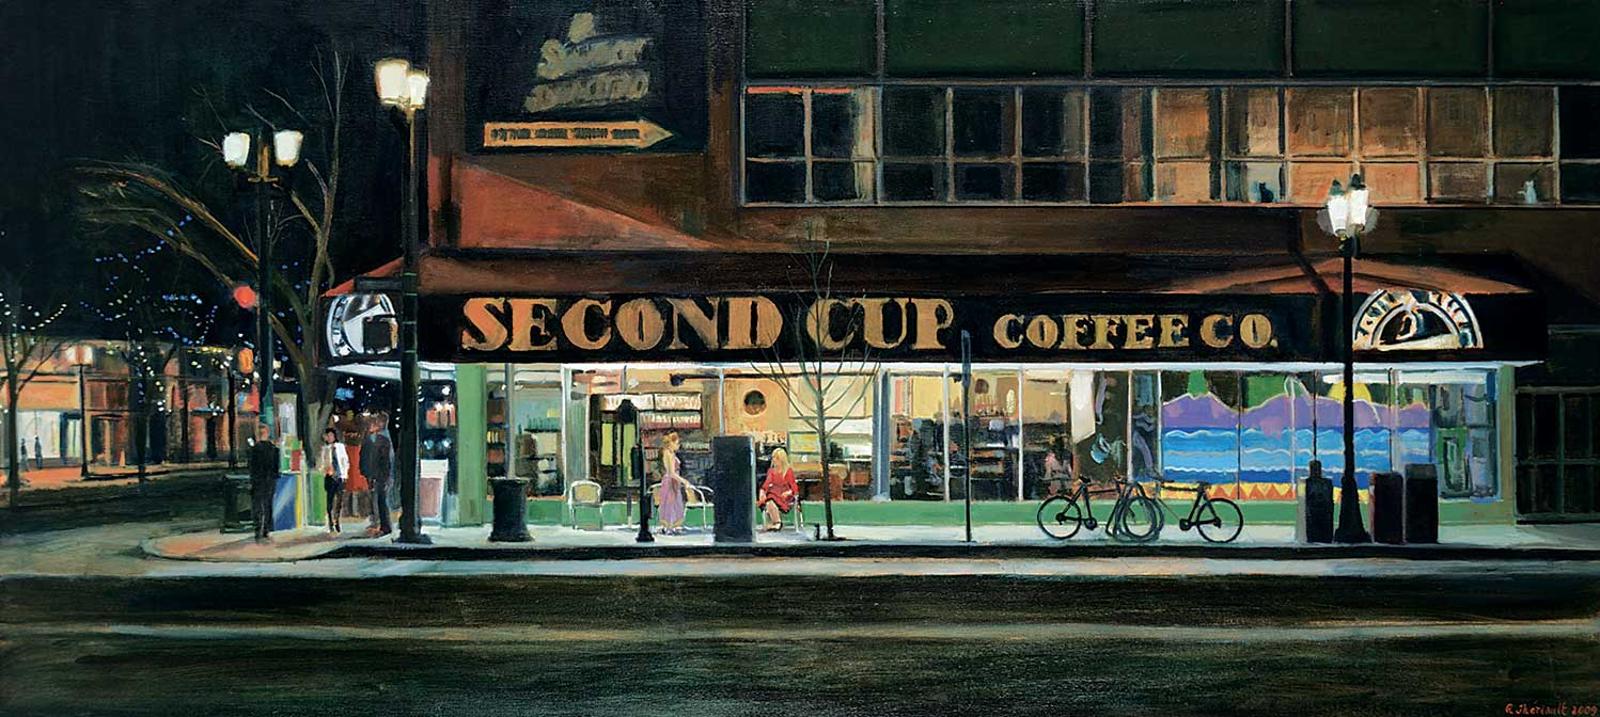 Raymond Theriault - The Second Cup